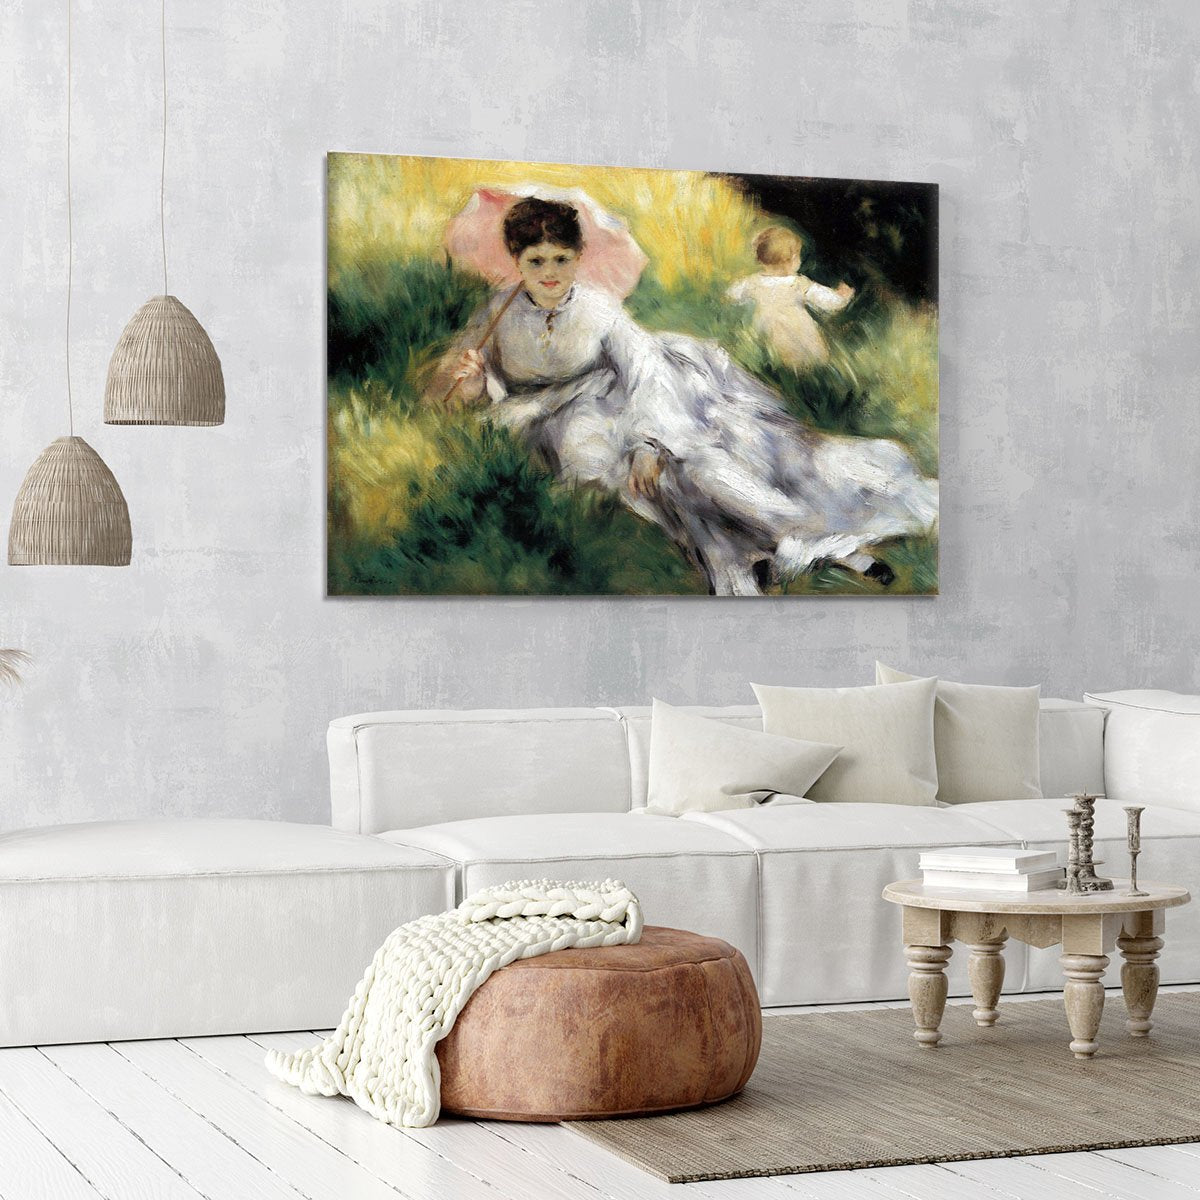 Woman with Parasol by Renoir Canvas Print or Poster